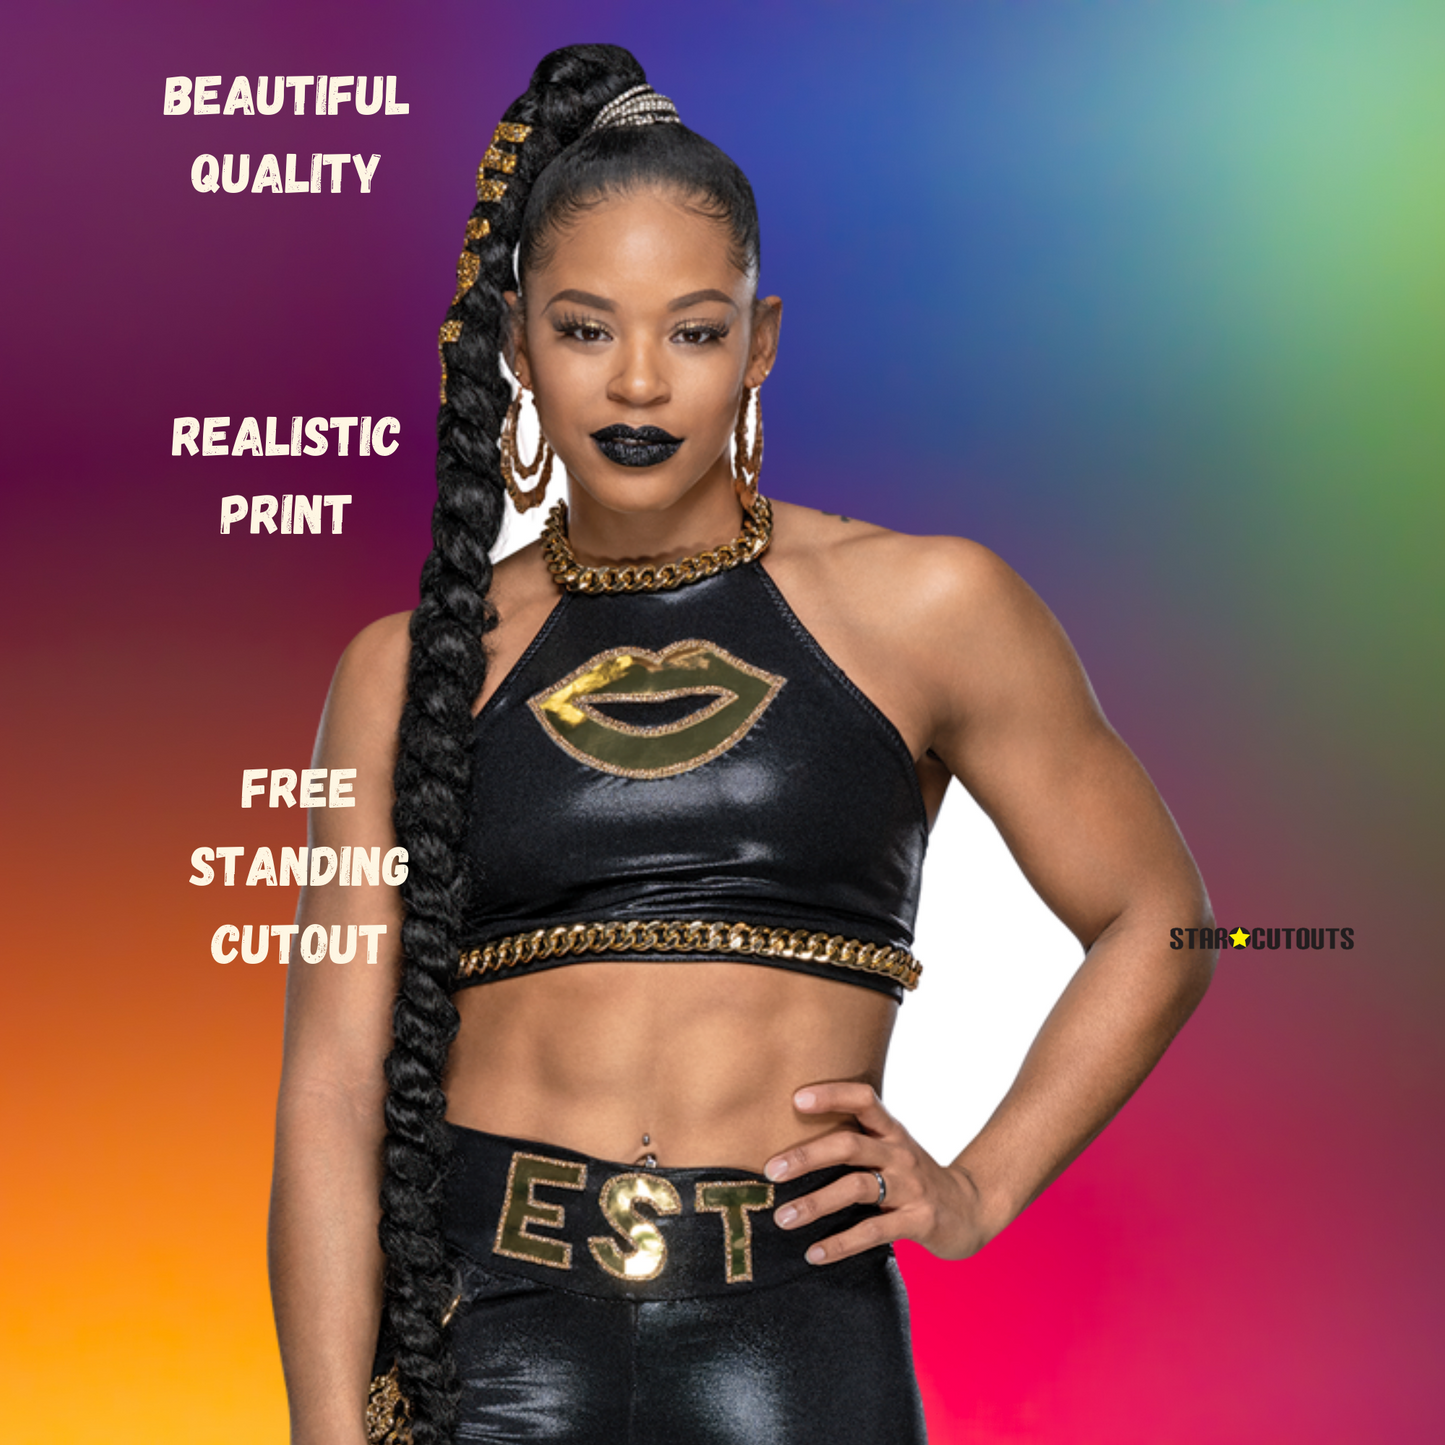 SC4313 Bianca Belair Black Outfit EST WWE Lifesize Cardboard Cut Out With Mini Wrestler